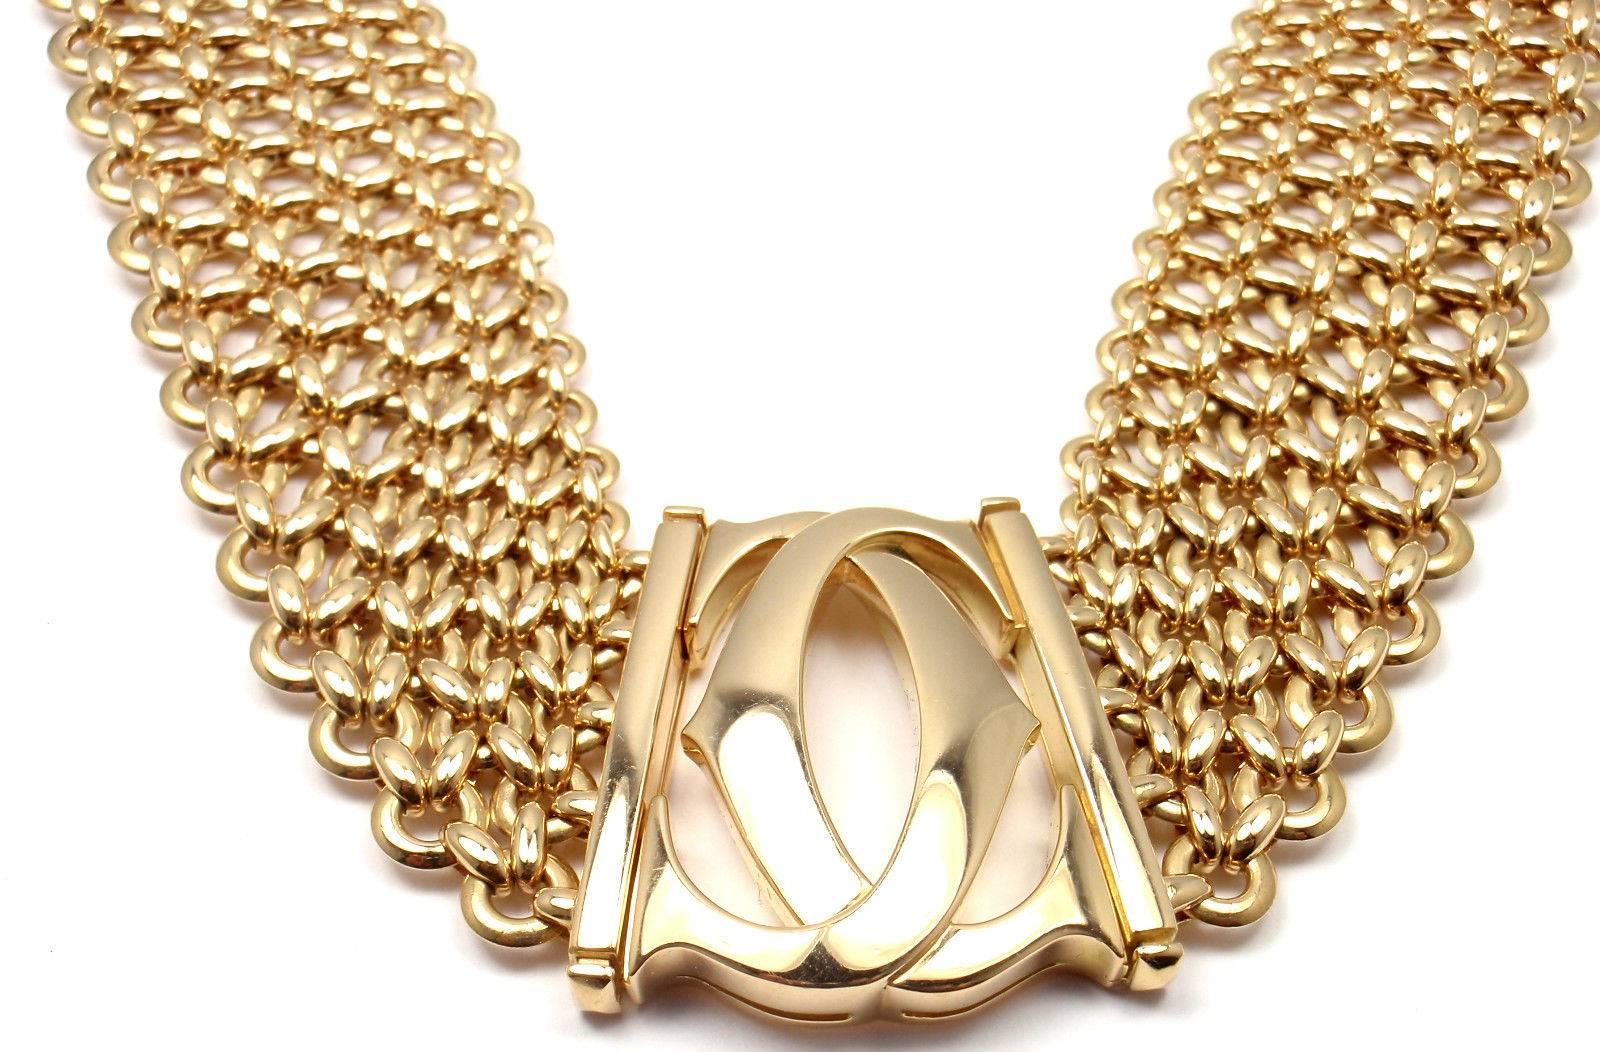 18k Yellow Gold Double C Five Row Wide Link Penelope Necklace by Cartier. 
This necklace comes with original Cartier box.

Details: 
Weight: 211.9 grams
Length: 16